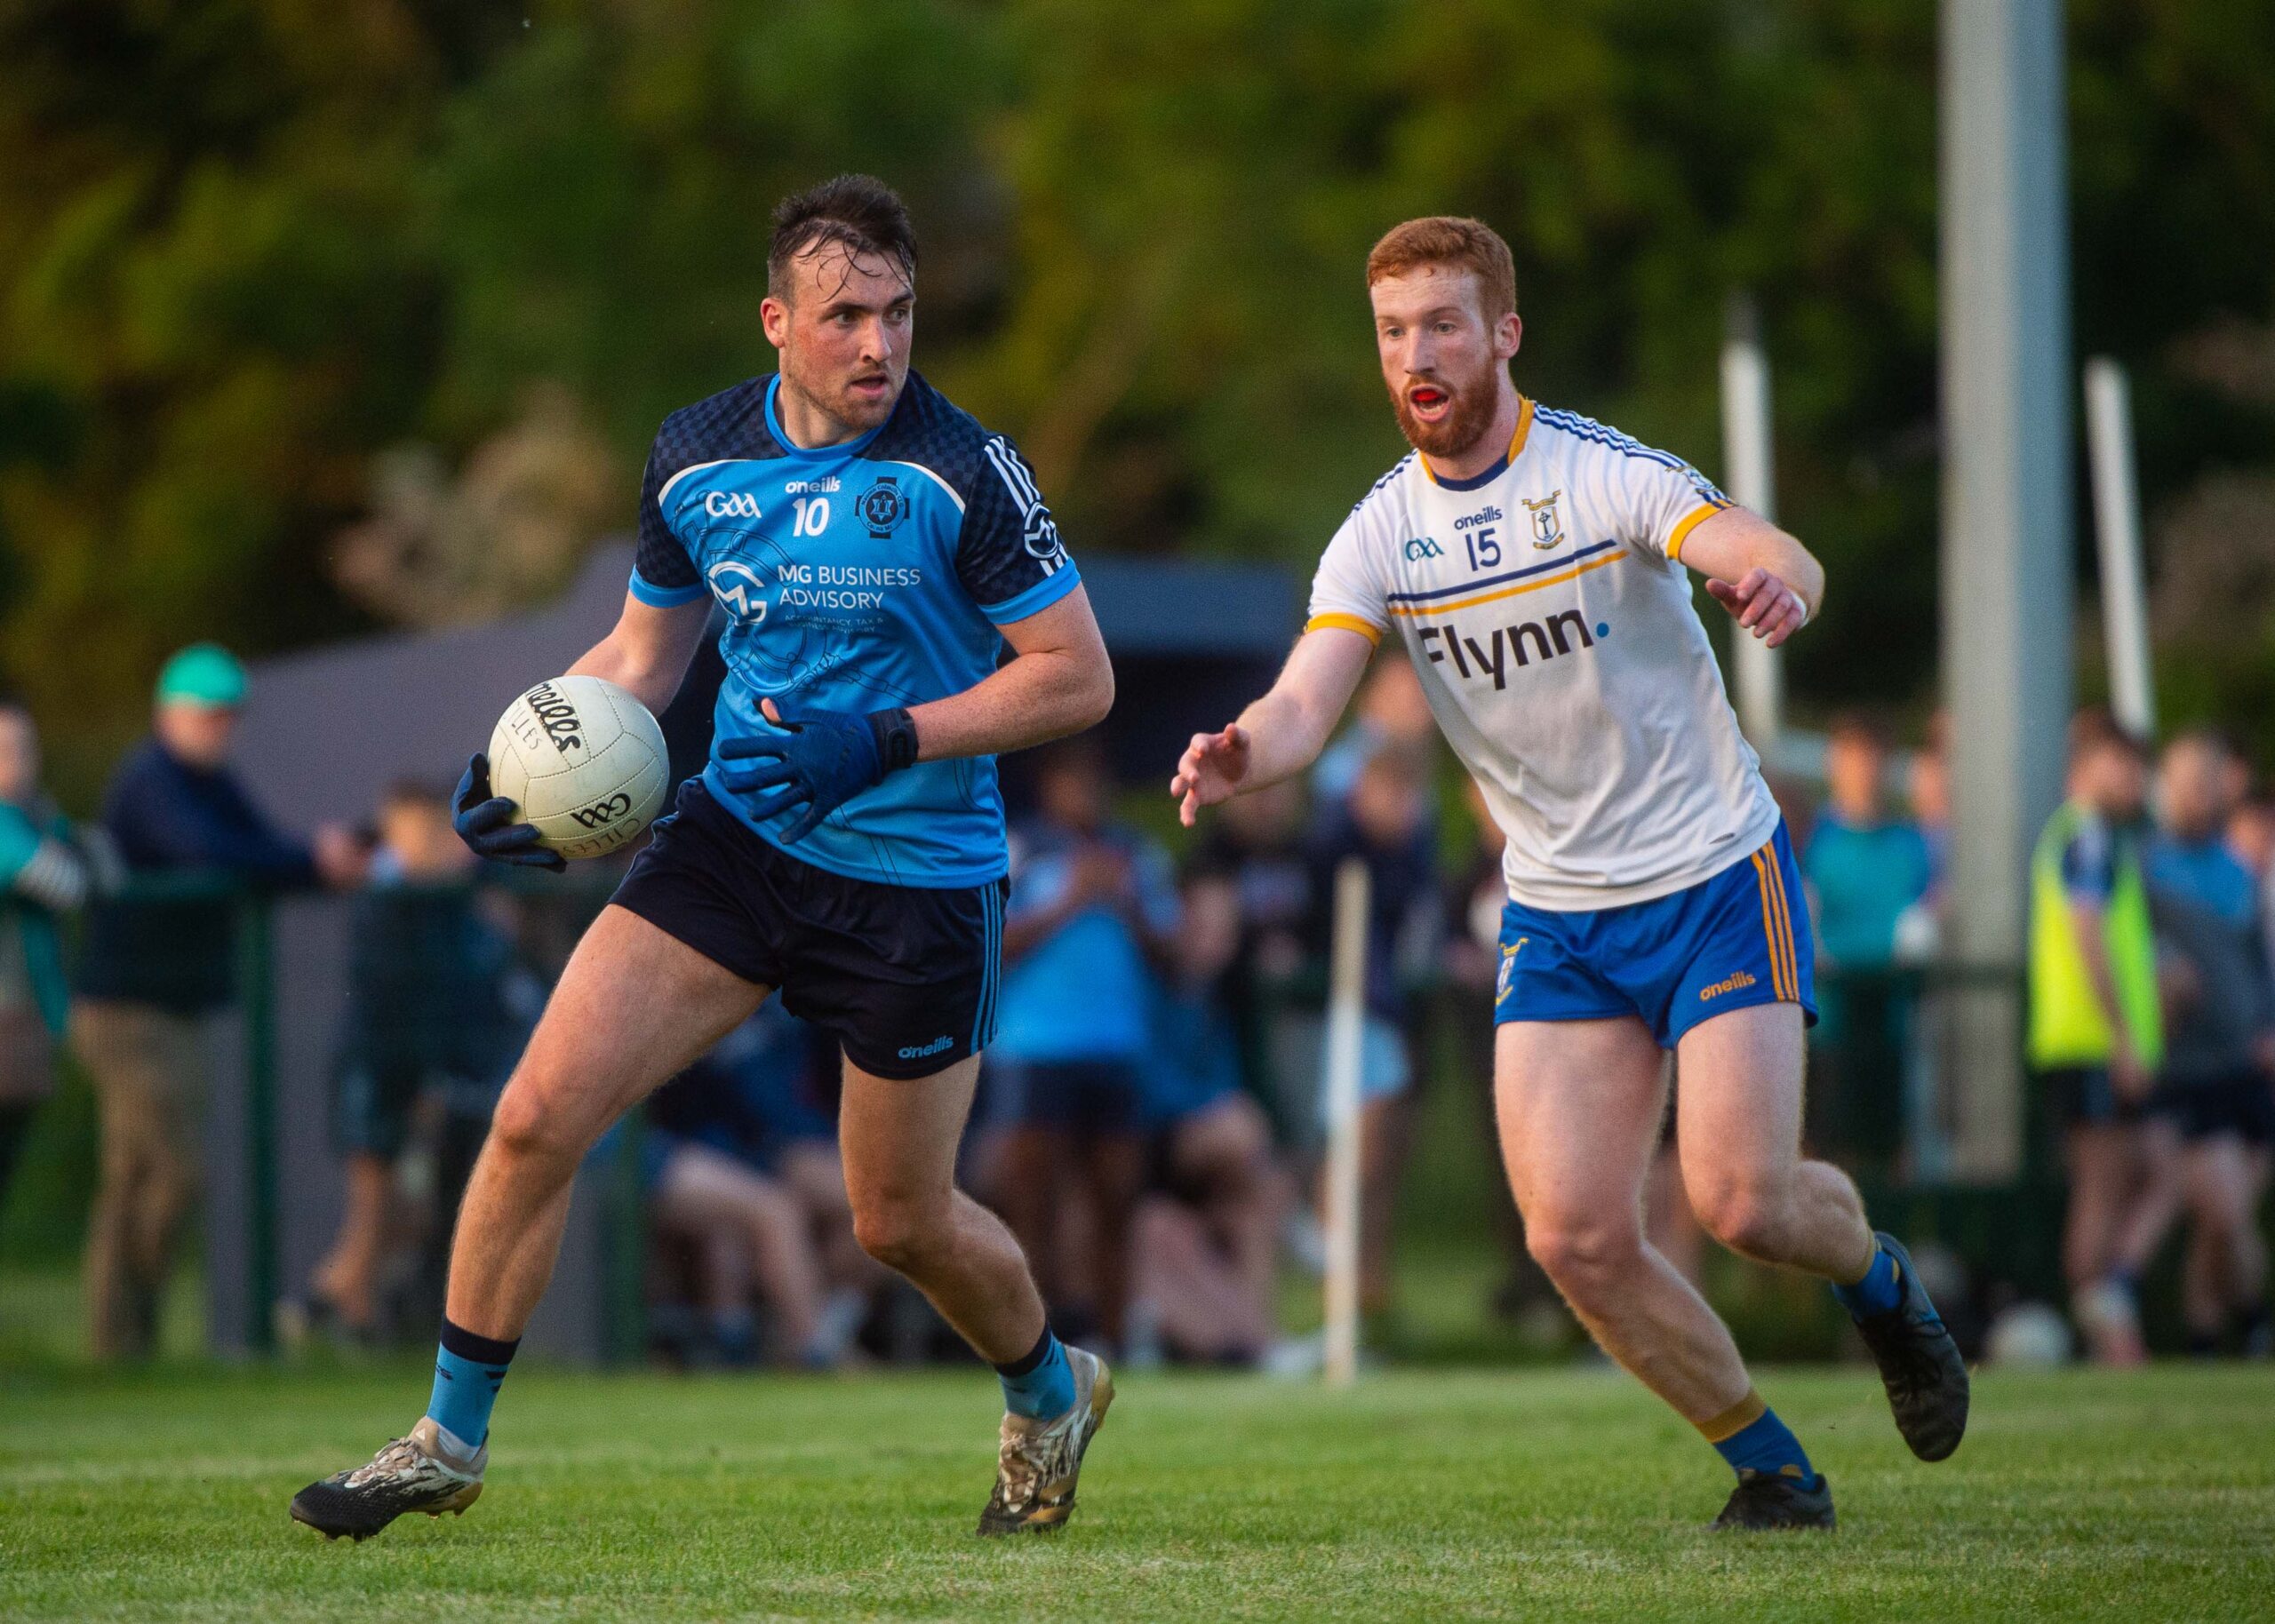 Will it be the ‘Cilles or Ratoath for glory?